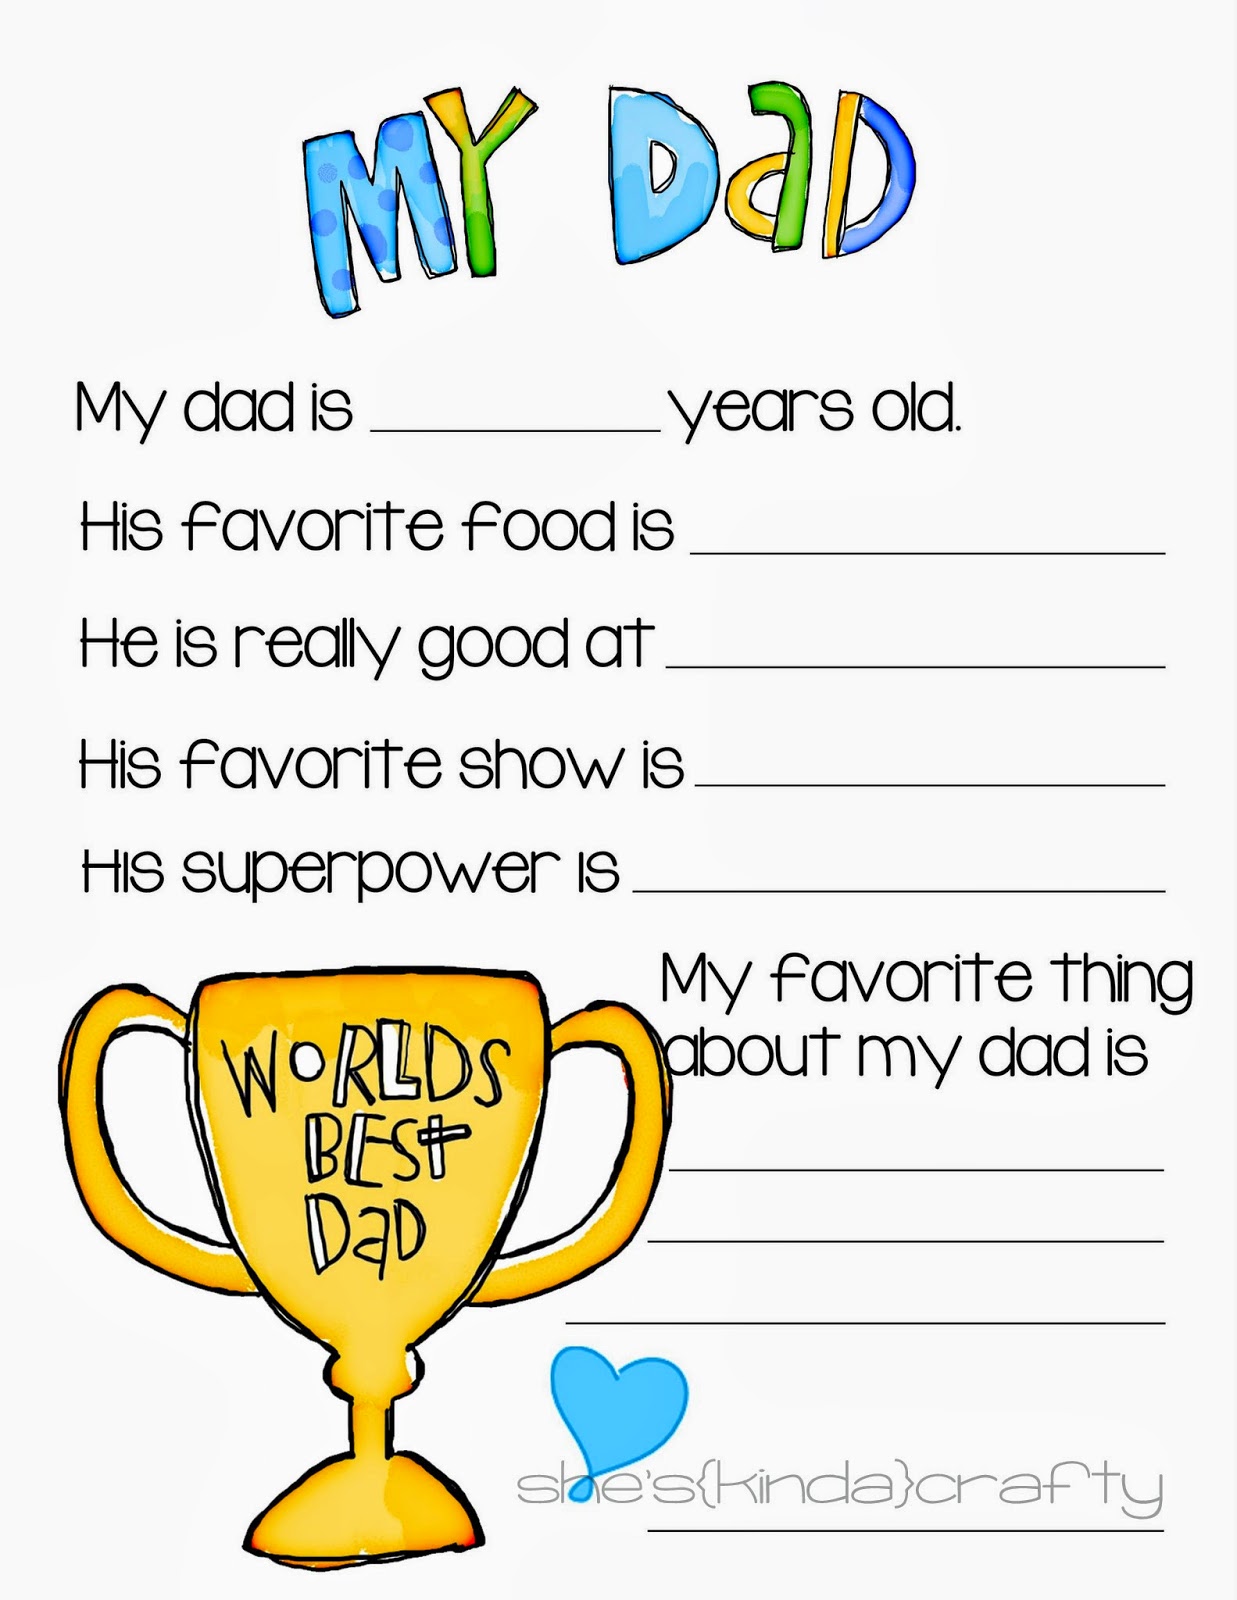 time-for-a-quiz-father-s-day-free-printables-shes-kinda-crafty